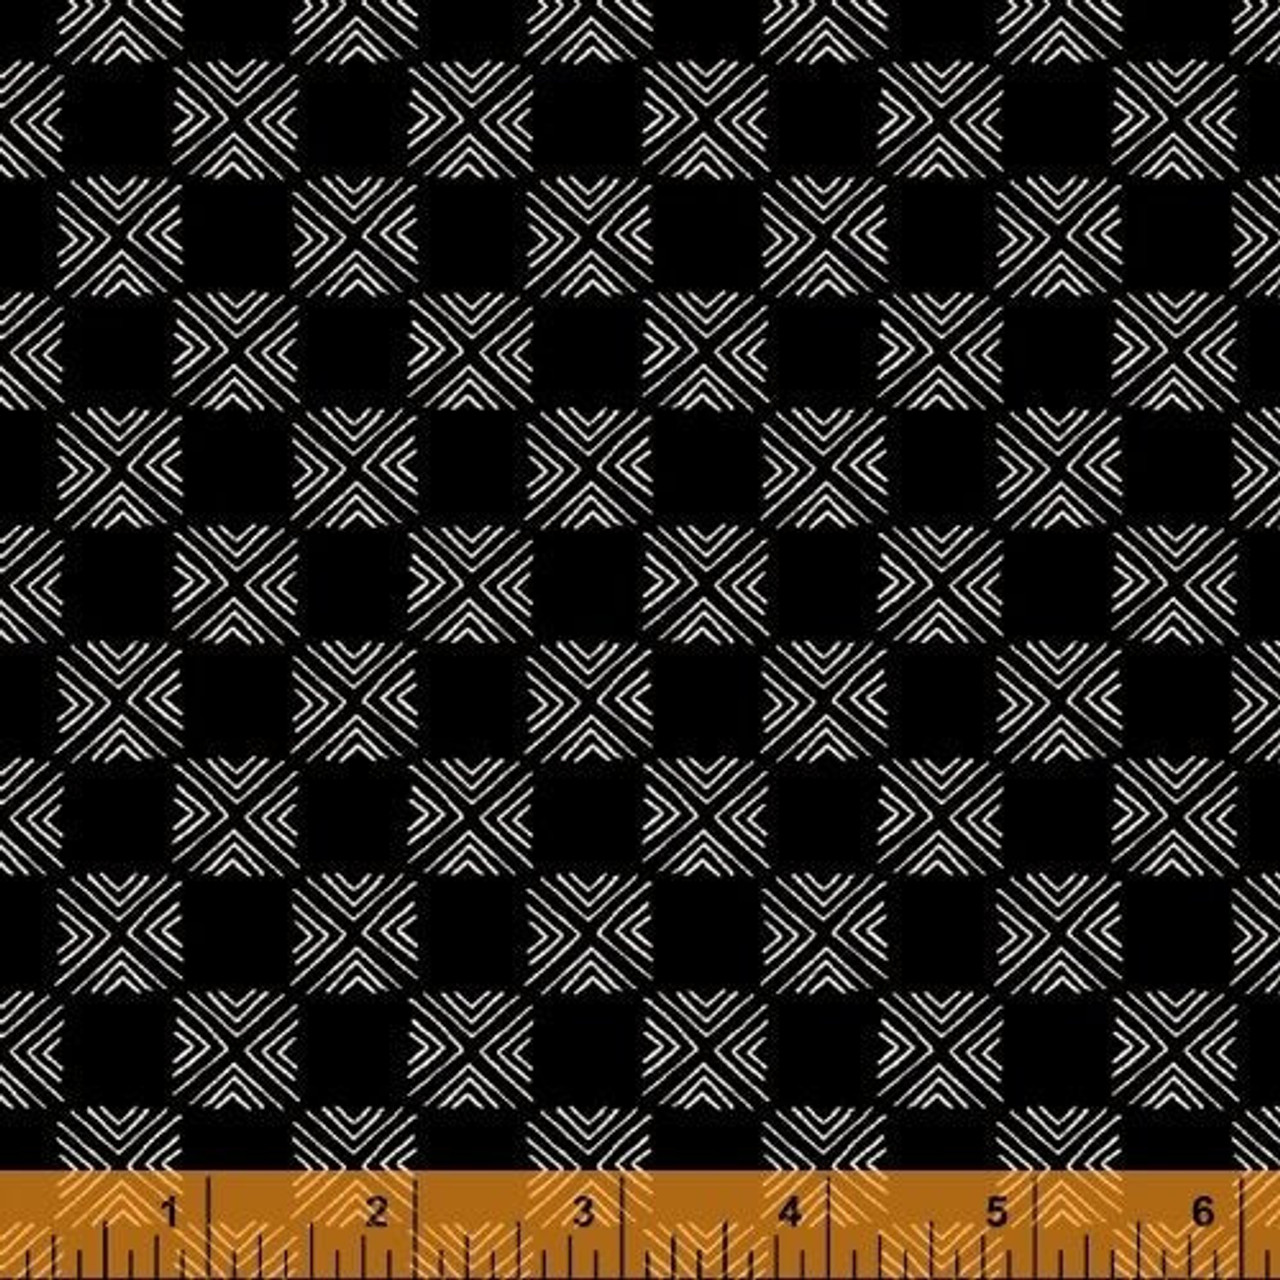 Windham Fabrics Terra Black with White Squares, By-the-yard.